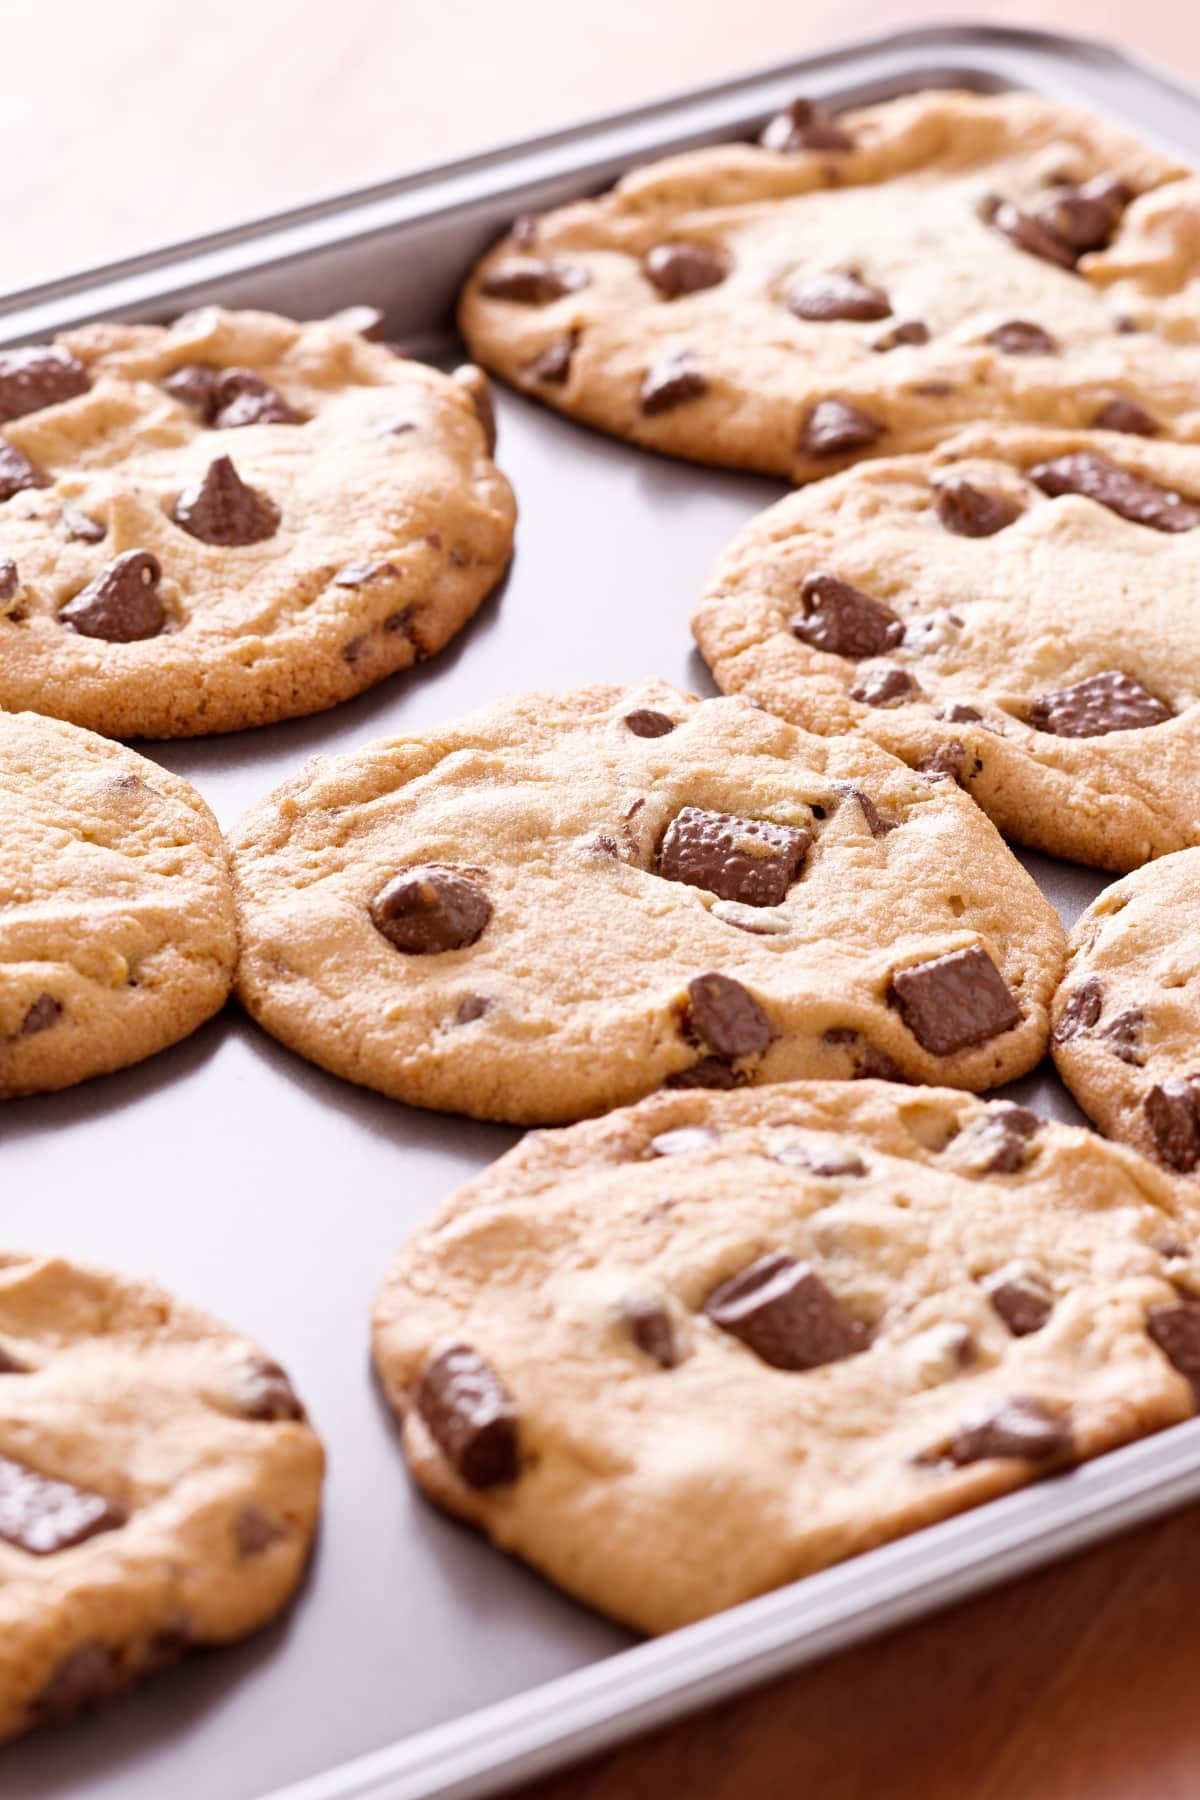 https://insanelygoodrecipes.com/wp-content/uploads/2023/07/Homemade-Cookies-Out-of-The-Oven-in-a-Cookie-Sheet.jpg